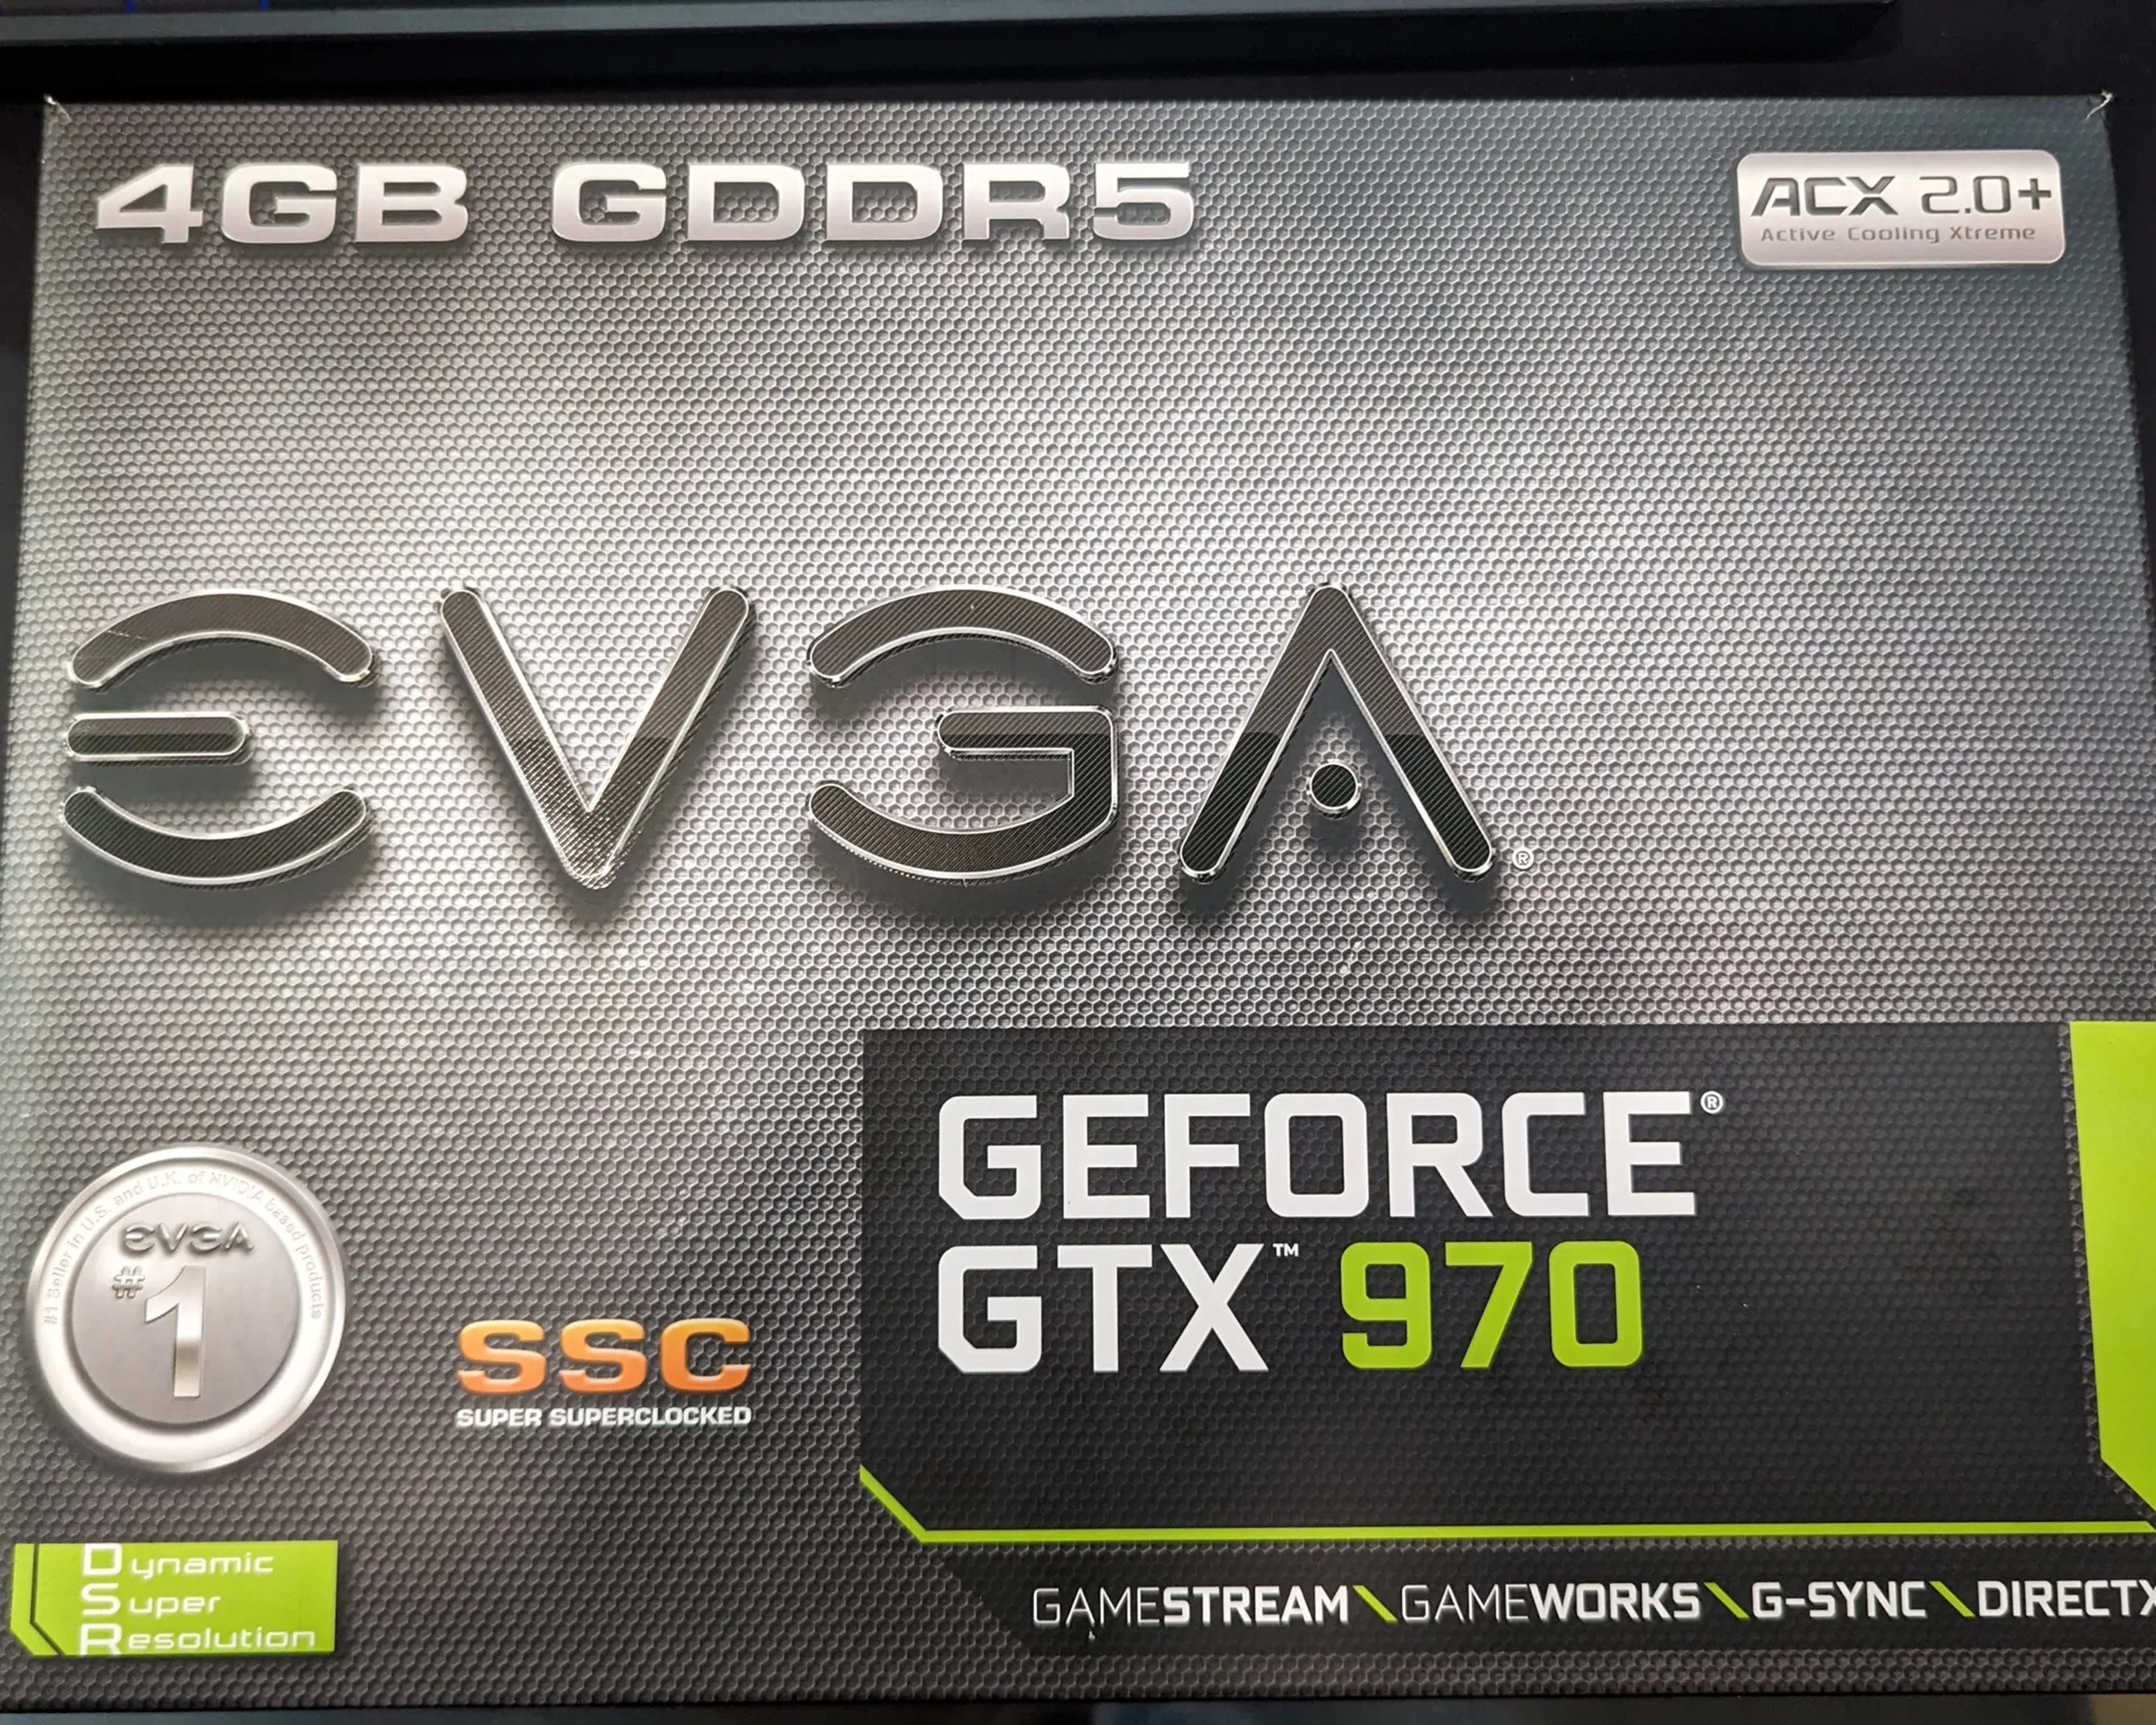 EVGA GeForce GTX 970 4GB SSC Gaming ACX 2.0+ Cooling Graphics Card (04G-P4-3975-KR)